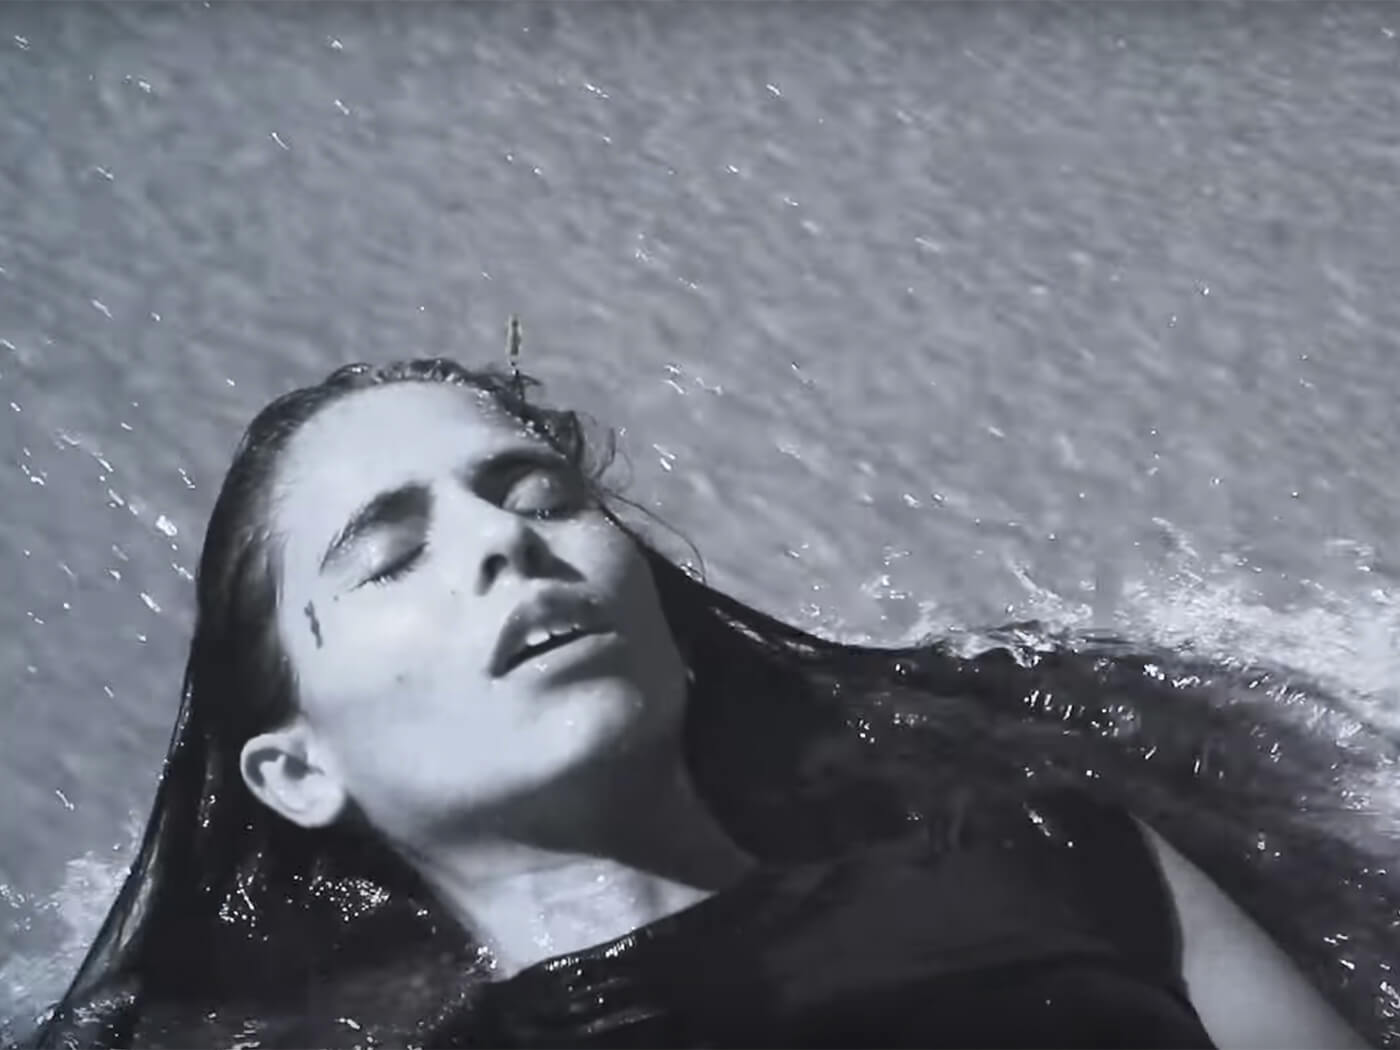 Shake Drops Black And White Video For “Fish On Land”